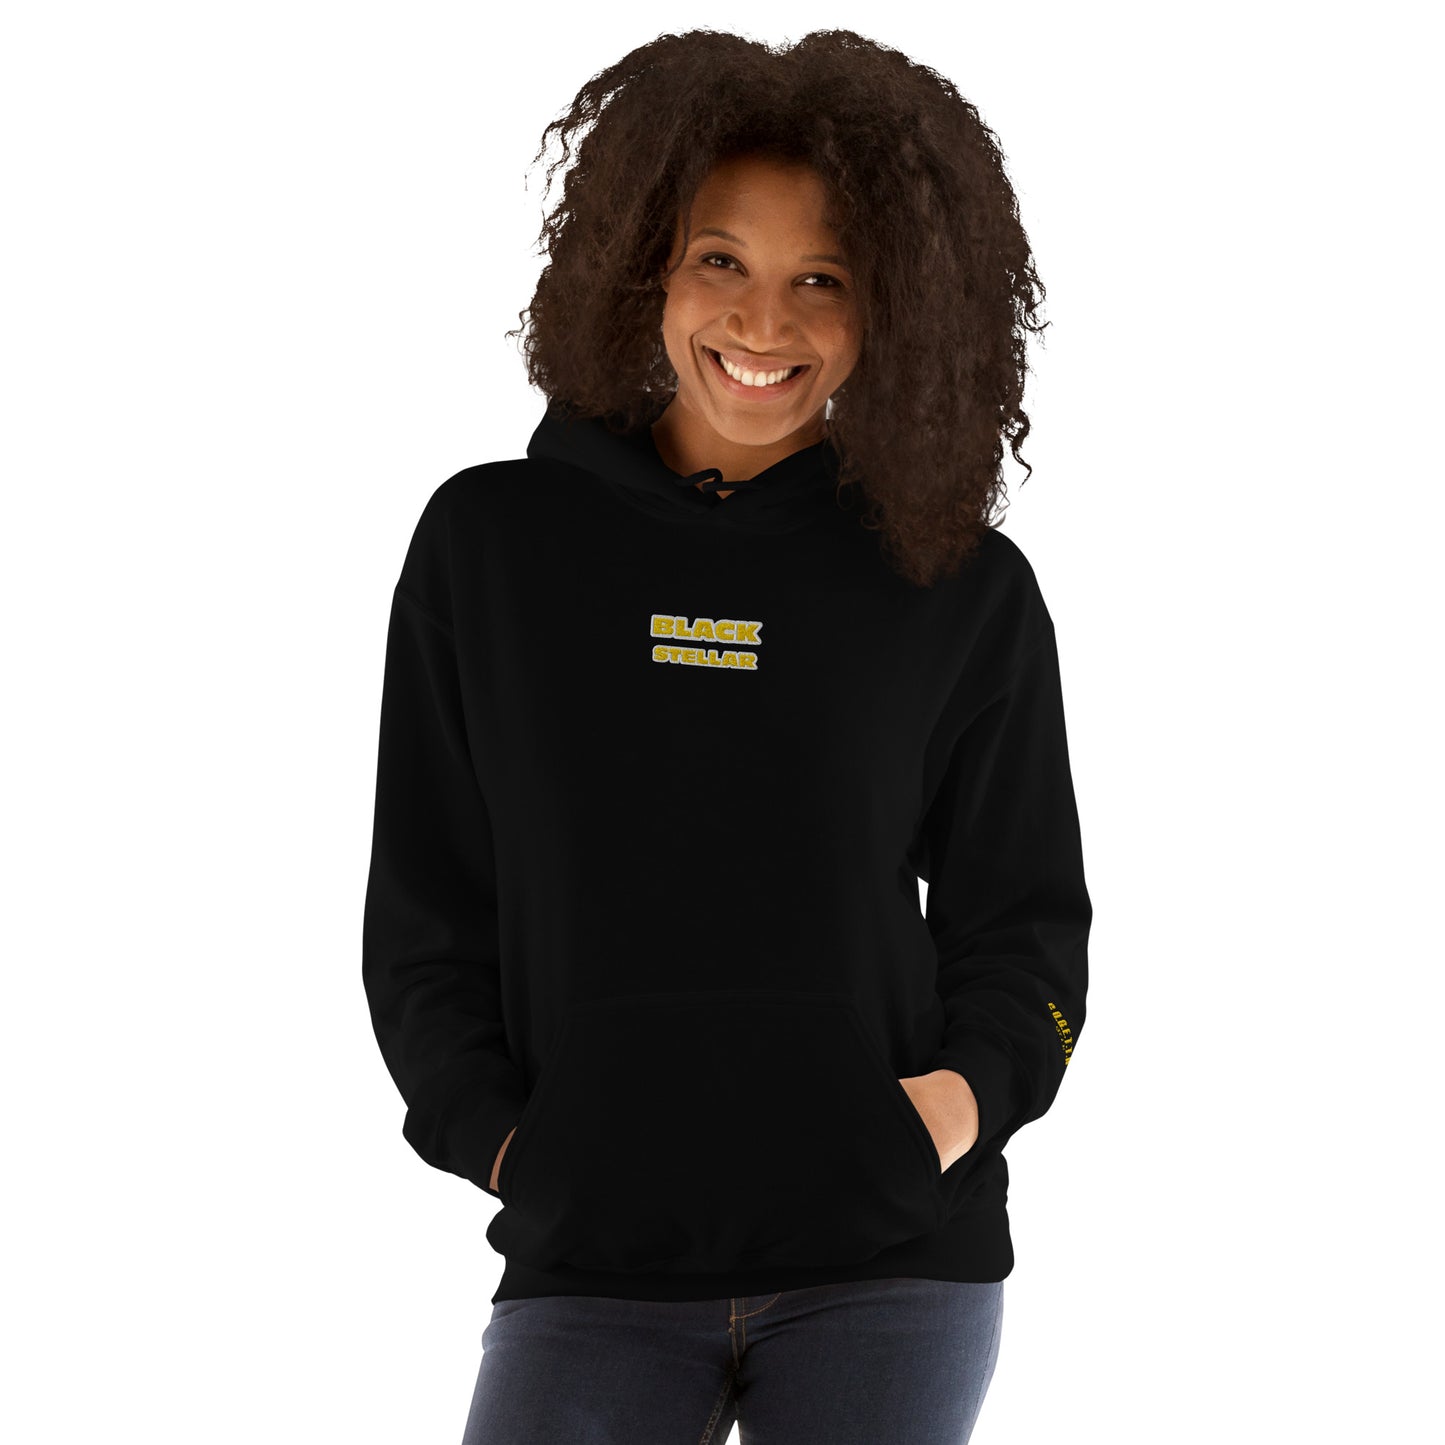 G.O.G.E.T.T.A "Black Stellar" Embroidered Unisex Hoodie